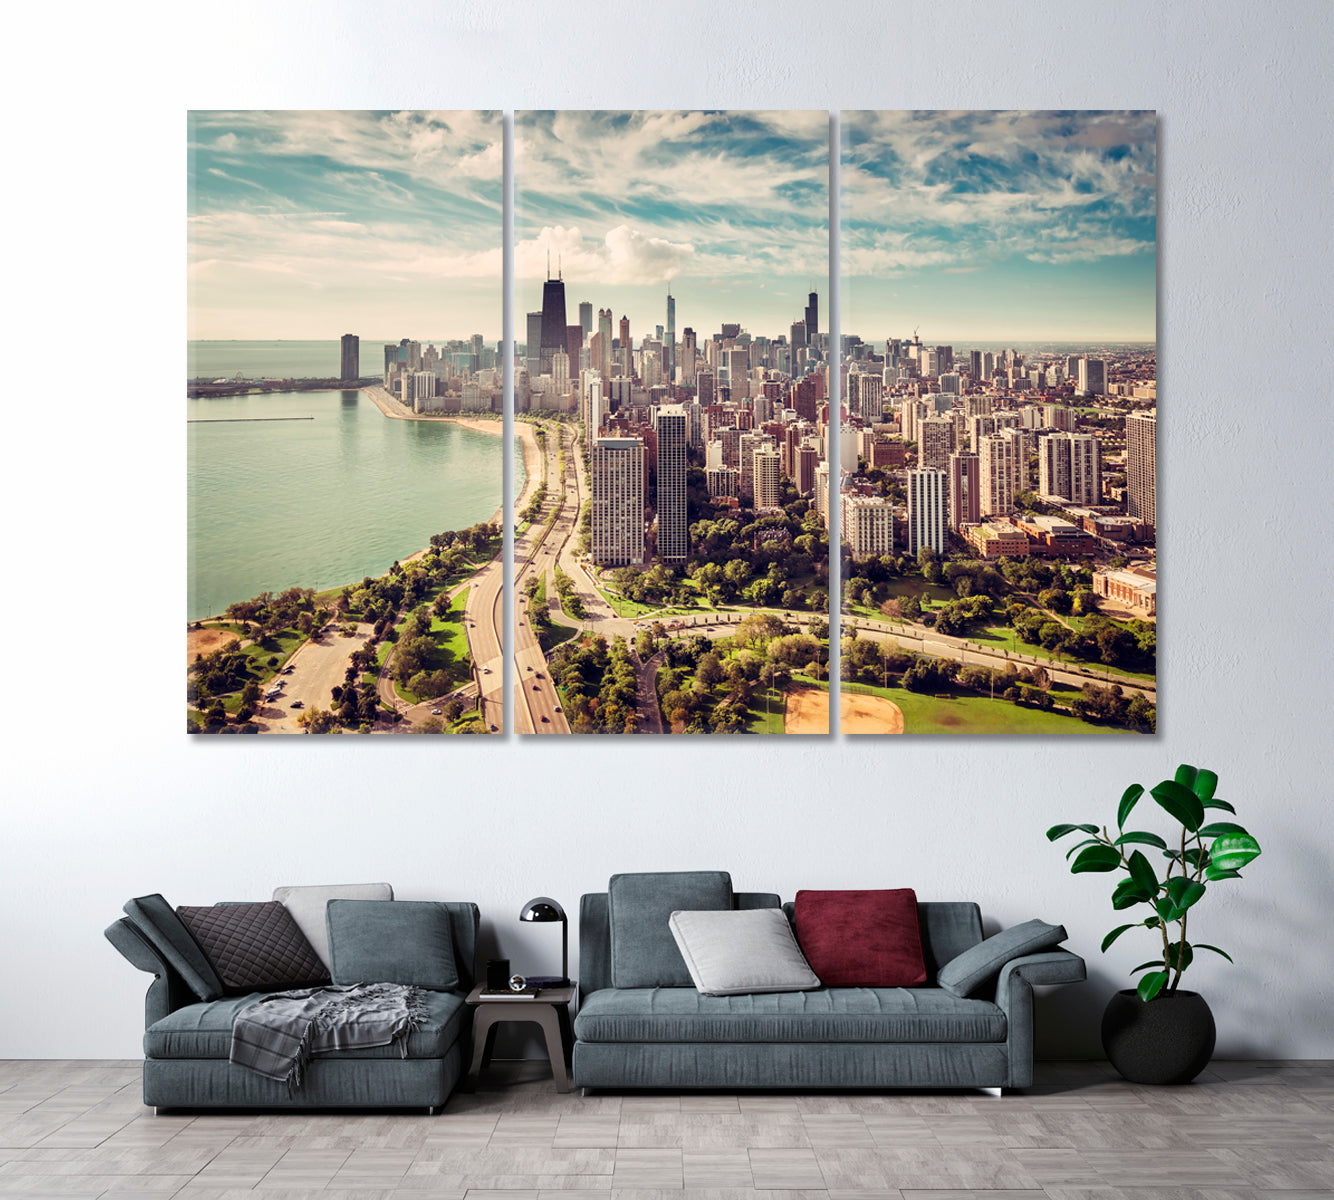 Chicago Skyline with Road by the Beach Canvas Print ArtLexy 3 Panels 36"x24" inches 